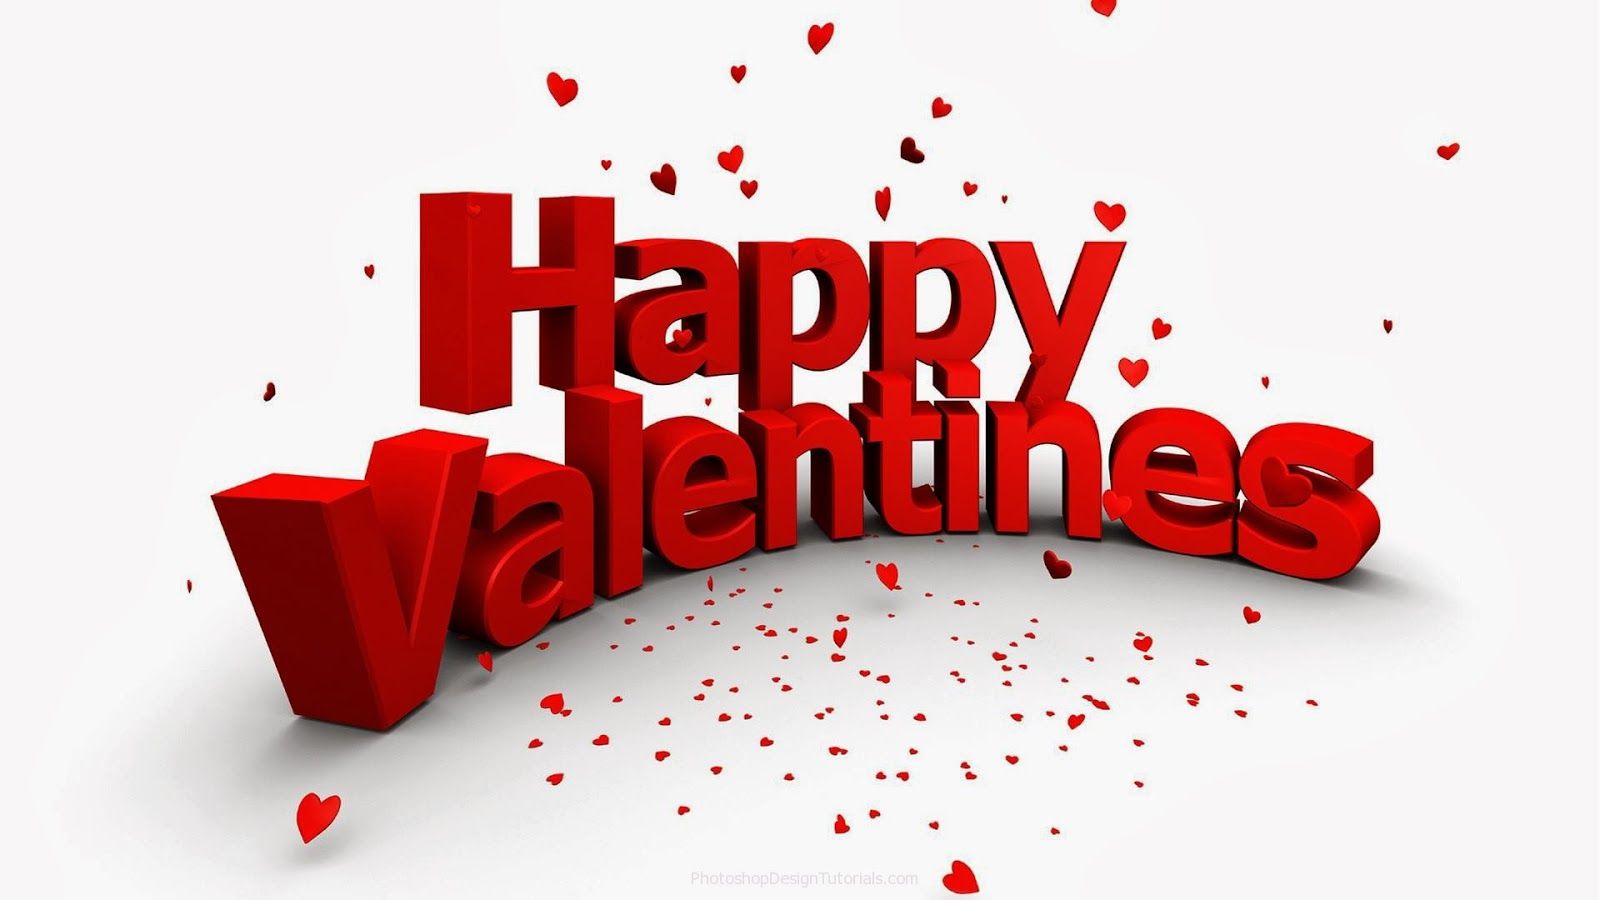 Happy Valentines Day 2016 Wallpapers,Images SMS Messages,Quotes